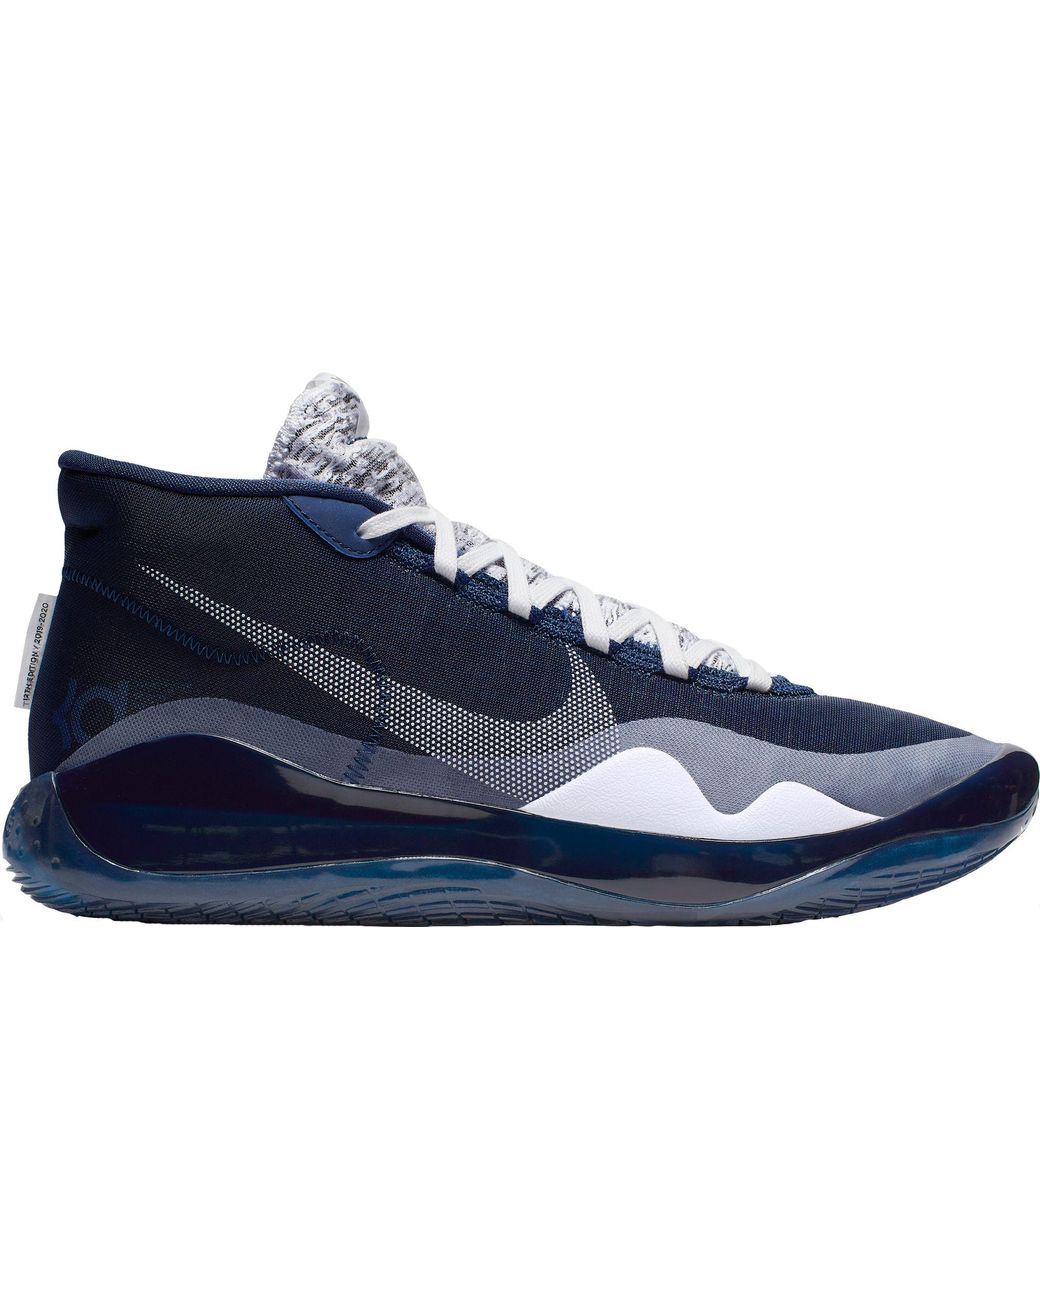 Nike Zoom Kd 12 Basketball Shoes in Midnight Navy/White (Blue) for Men ...